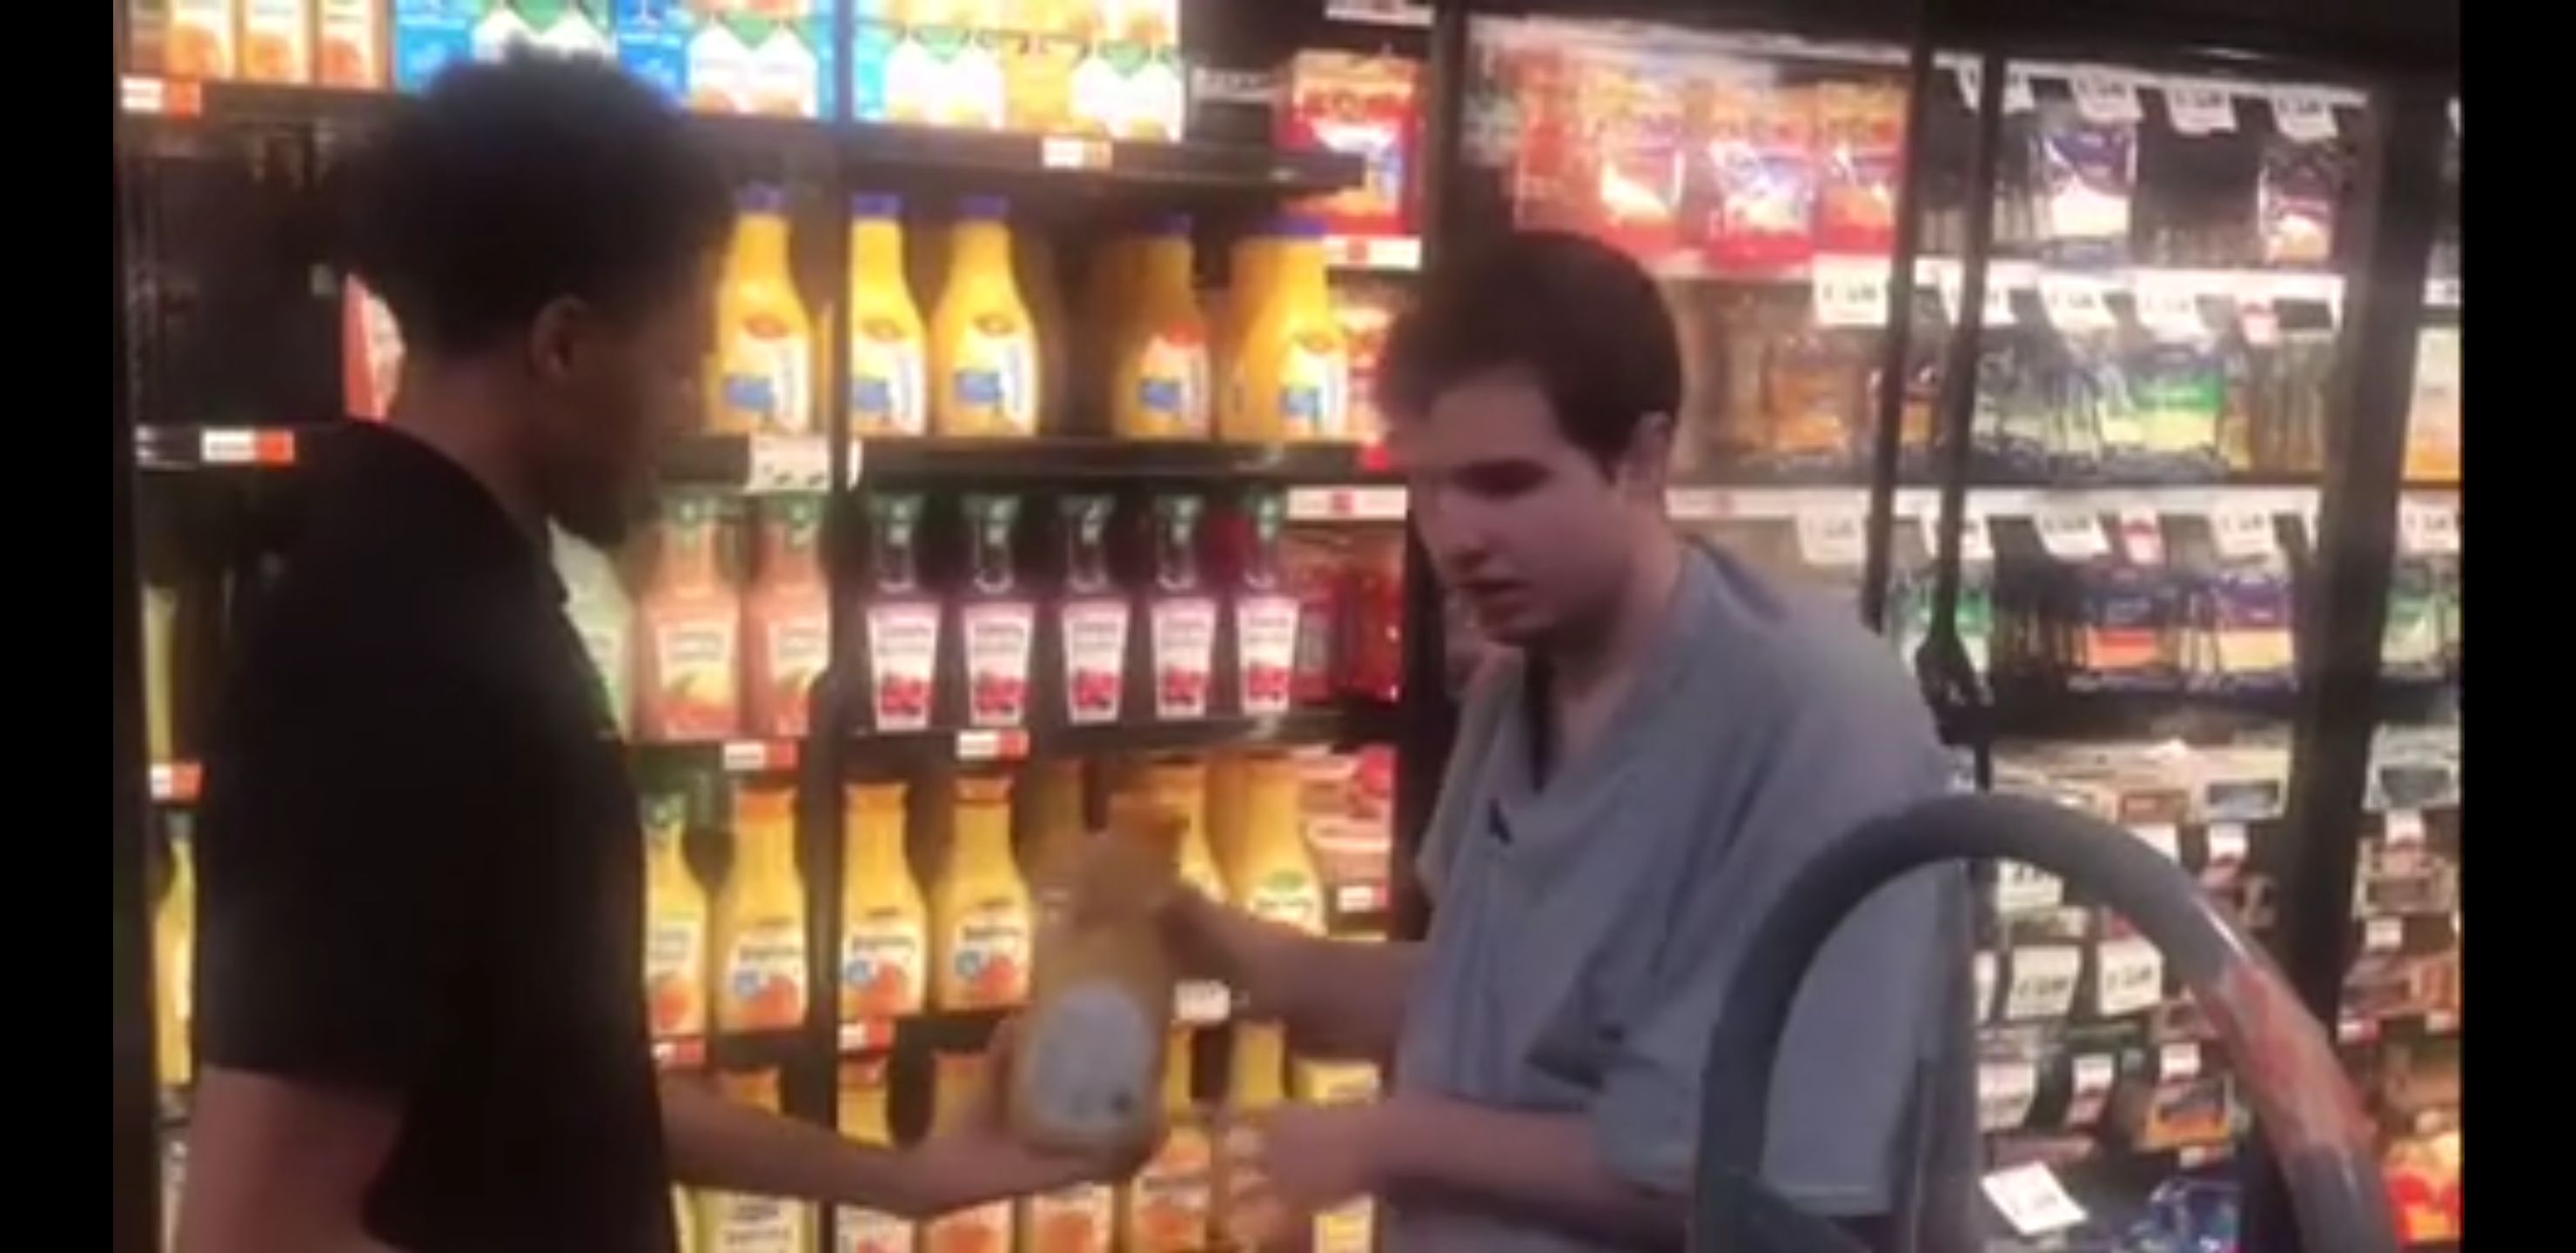 Store Stocker Shows Compassion On Young Man With Autism